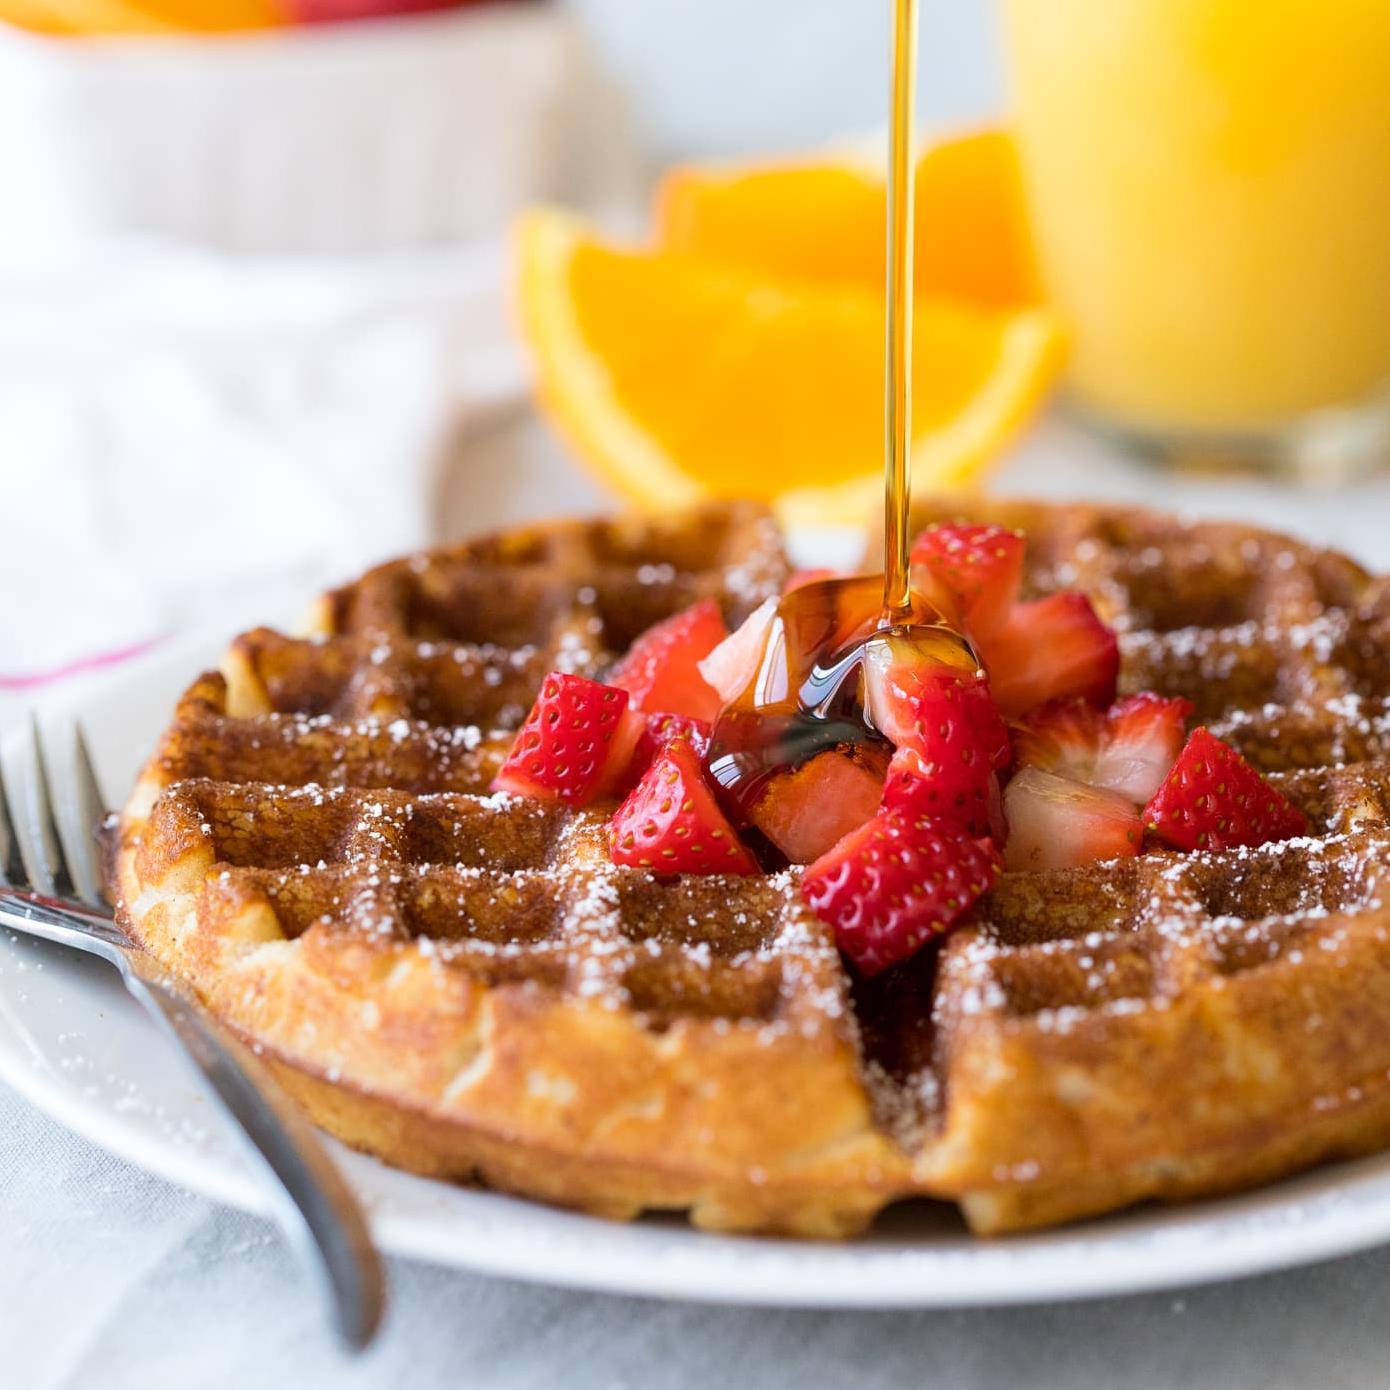  Who said gluten-free waffles can't be delicious?